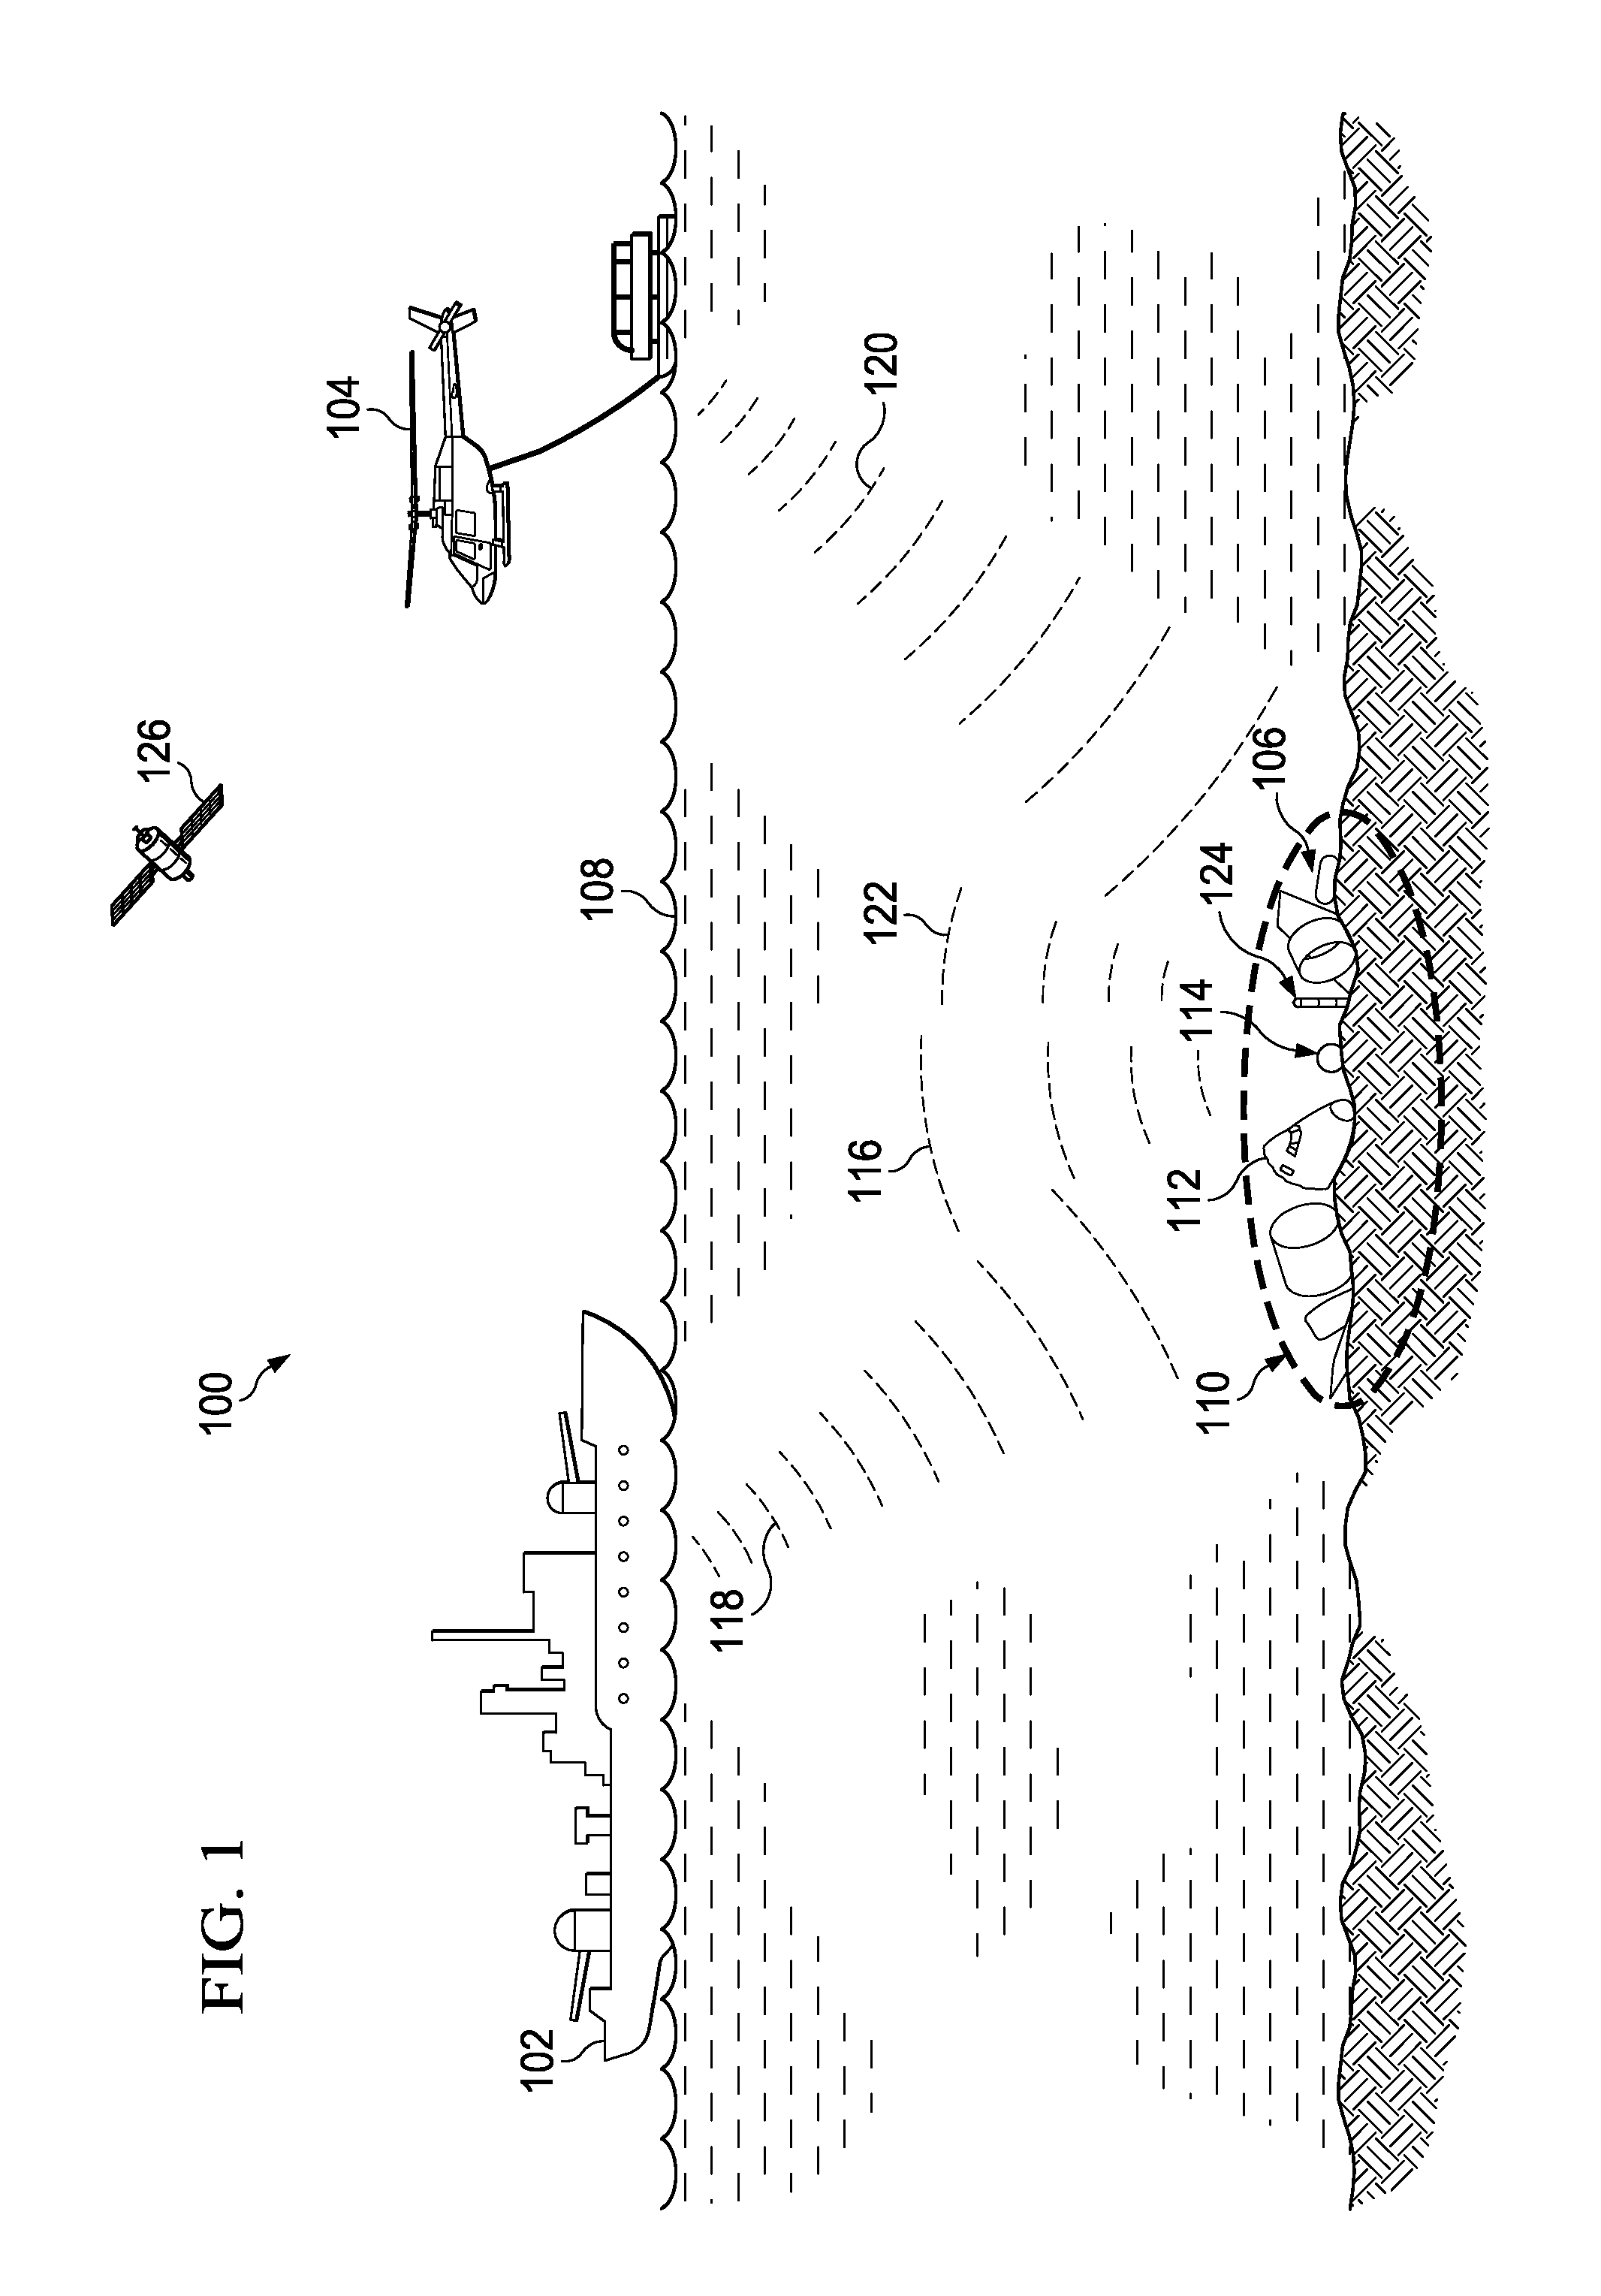 Aircraft Location System for Locating Aircraft in Water Environments